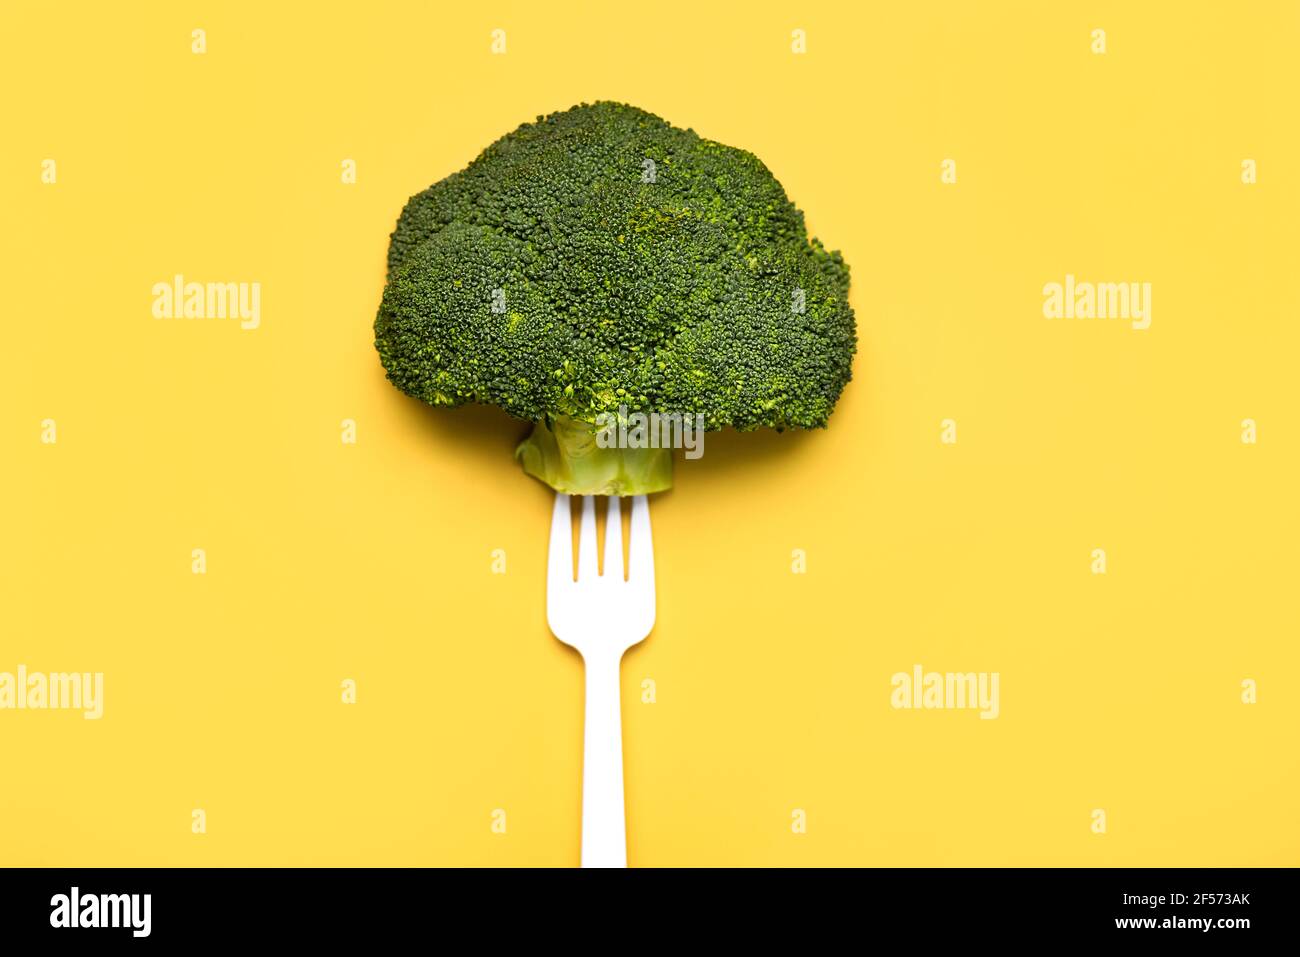 Fresh broccoli on a white plastic fork on a yellow background.Healthy food lifestyle Stock Photo